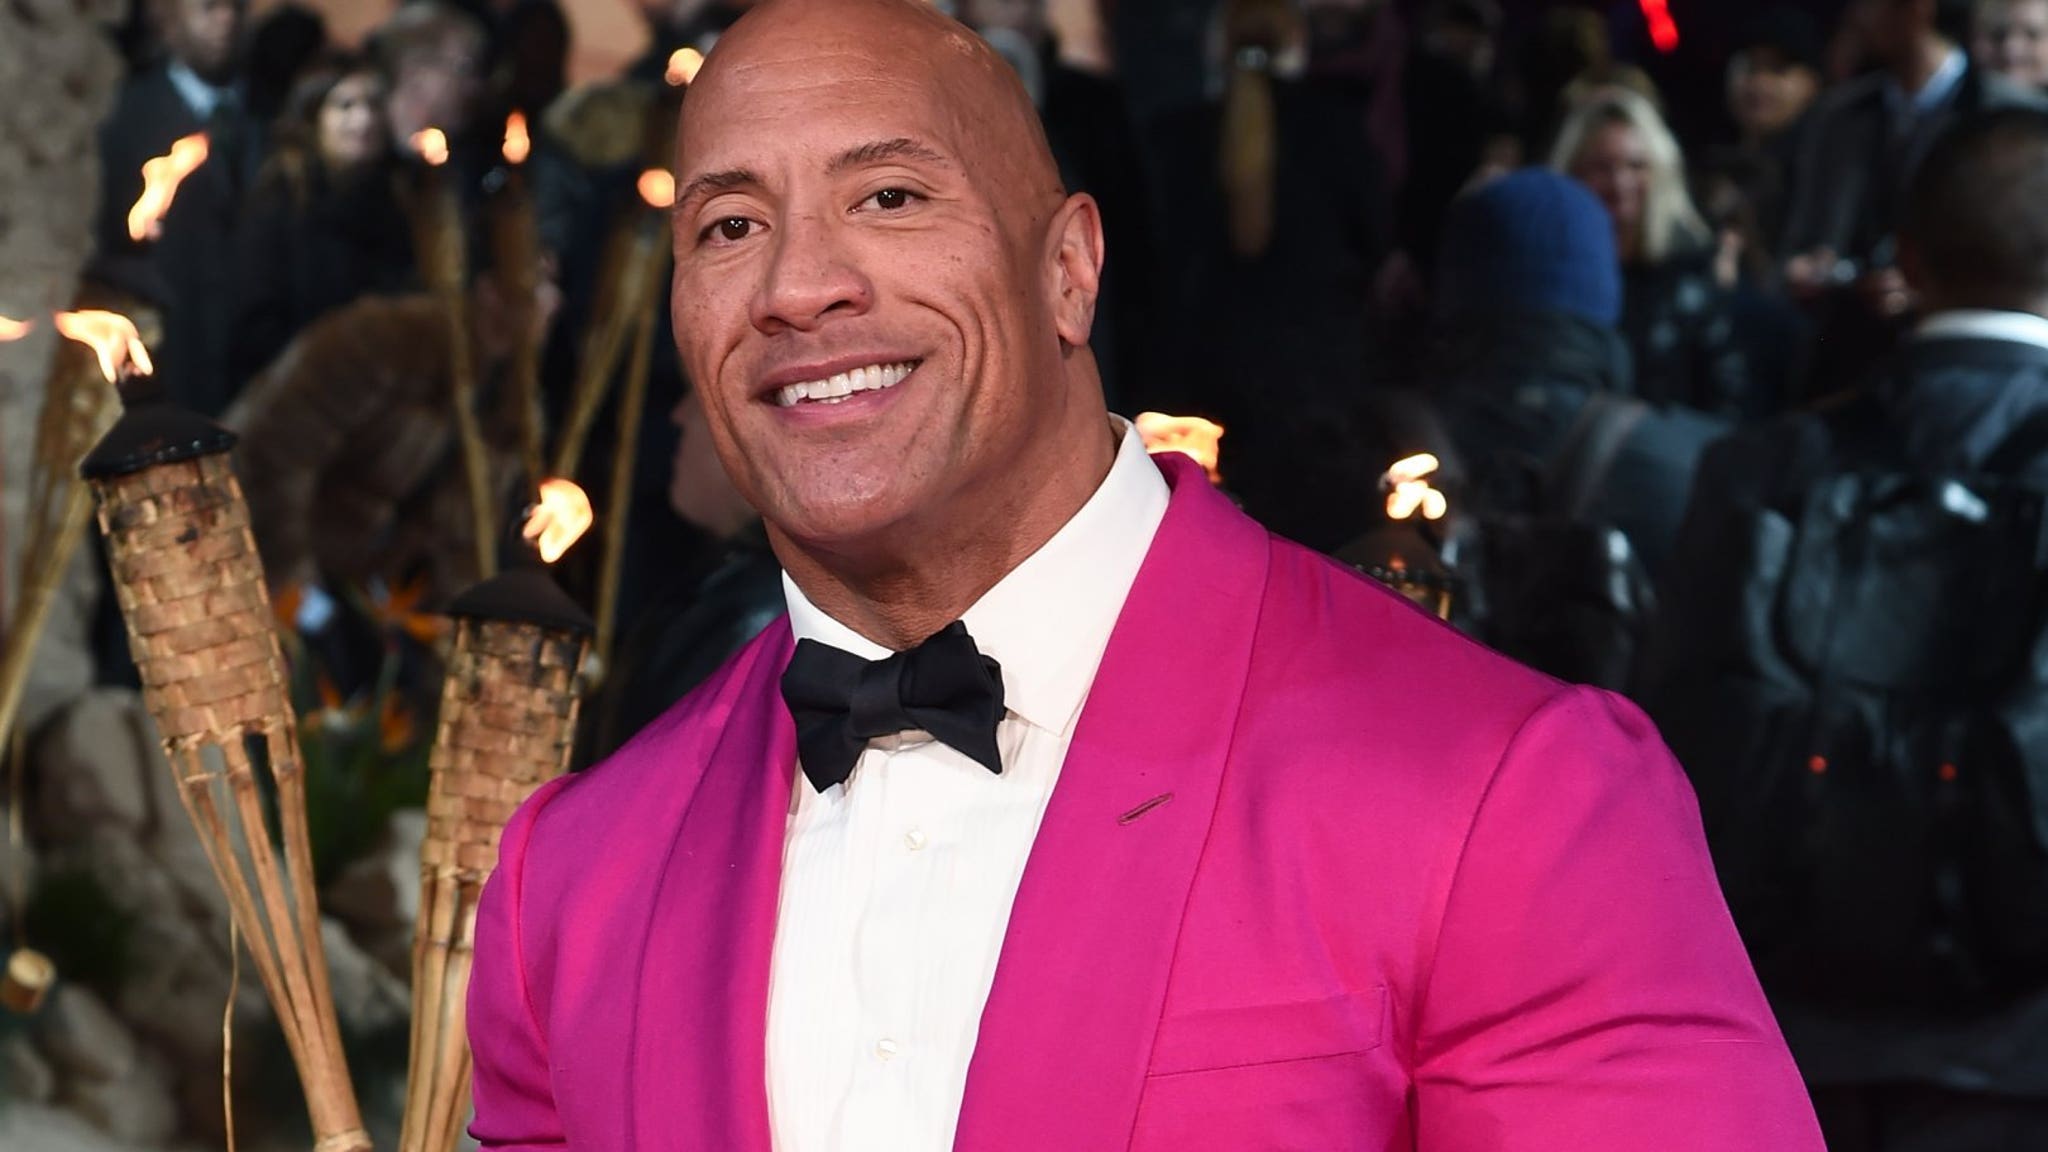 Dwayne Johnson gifts TV host his ring after she compliments it - PUNE.NEWS